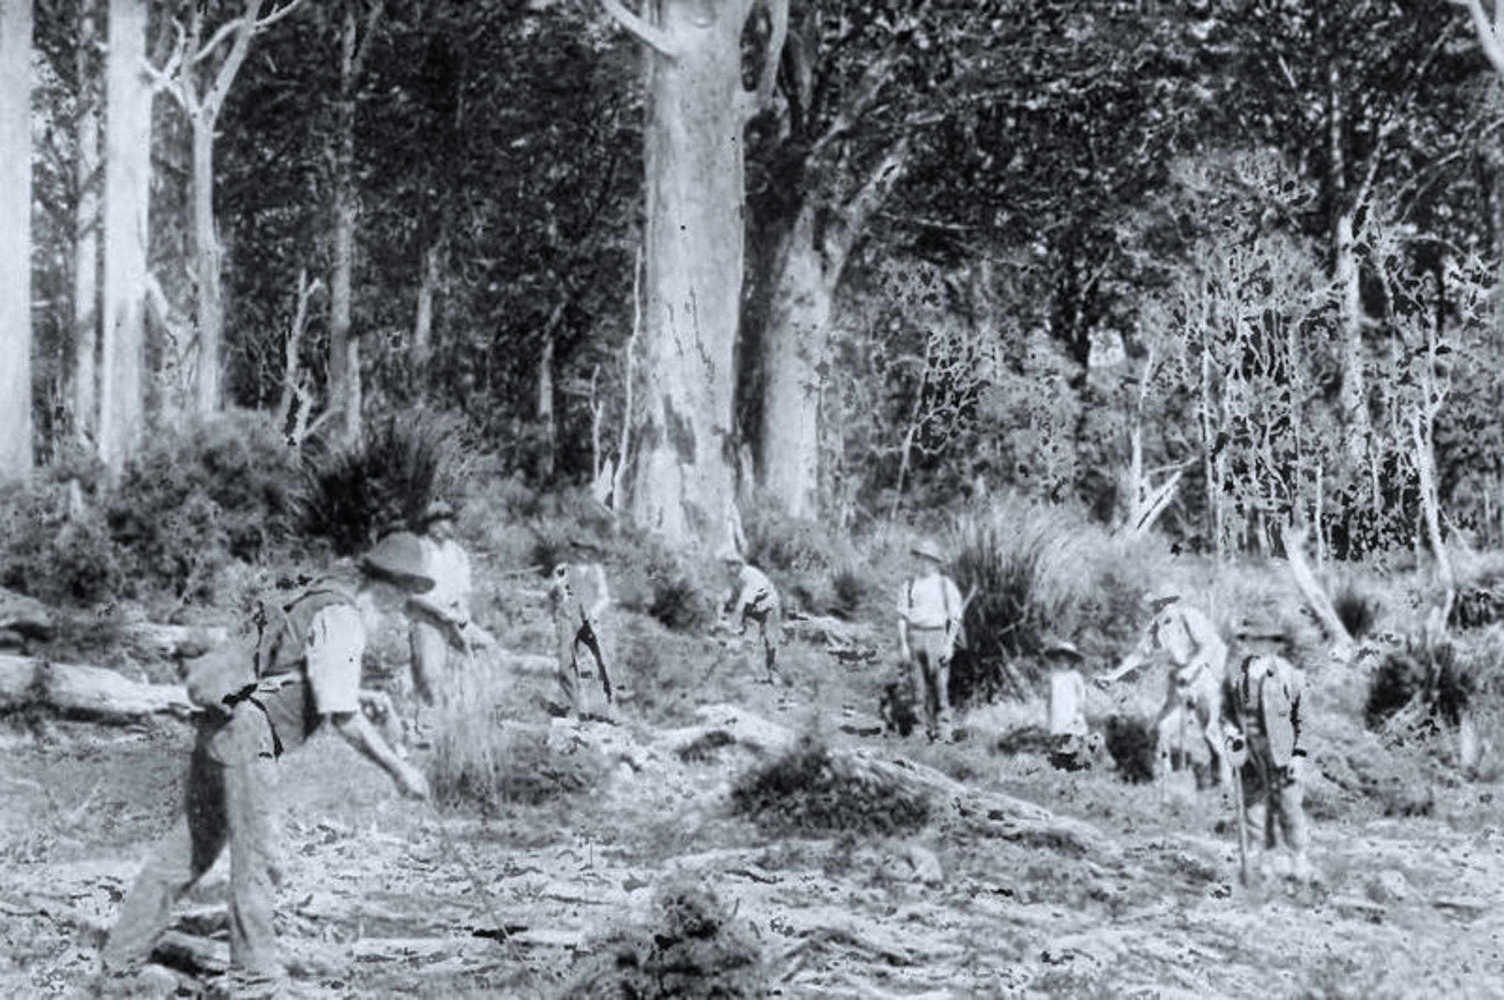 Gum diggers at work in kauri forest, Northland, New Zealand